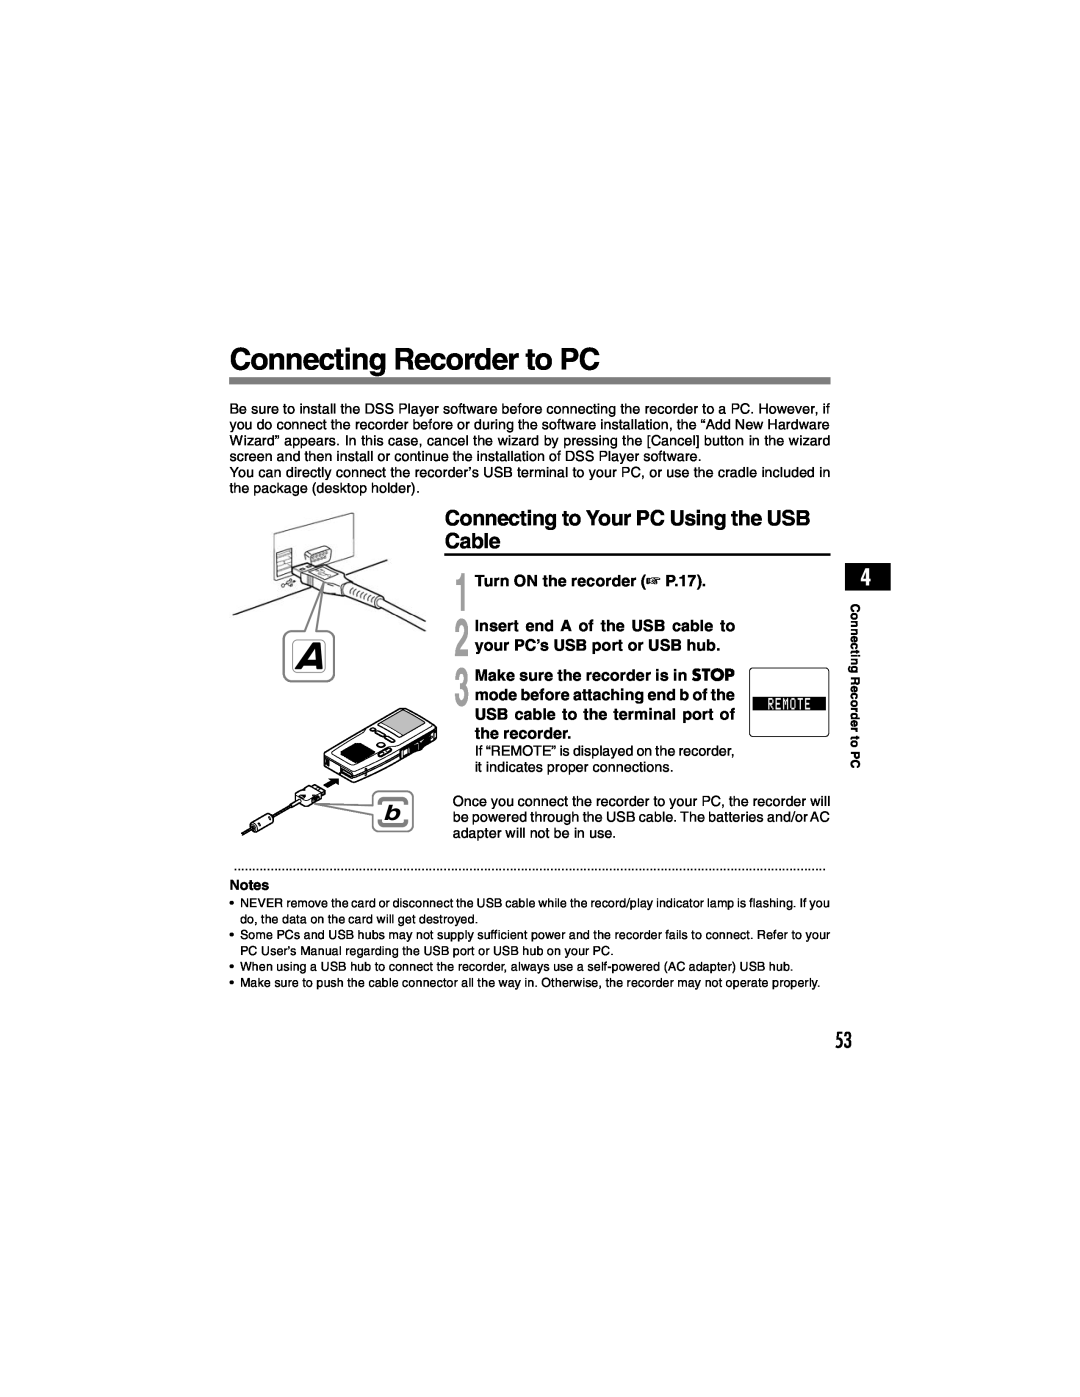 Olympus DS-4000 manual Connecting Recorder to PC, Connecting to Your PC Using the USB Cable, Turn ON the recorder P.17 